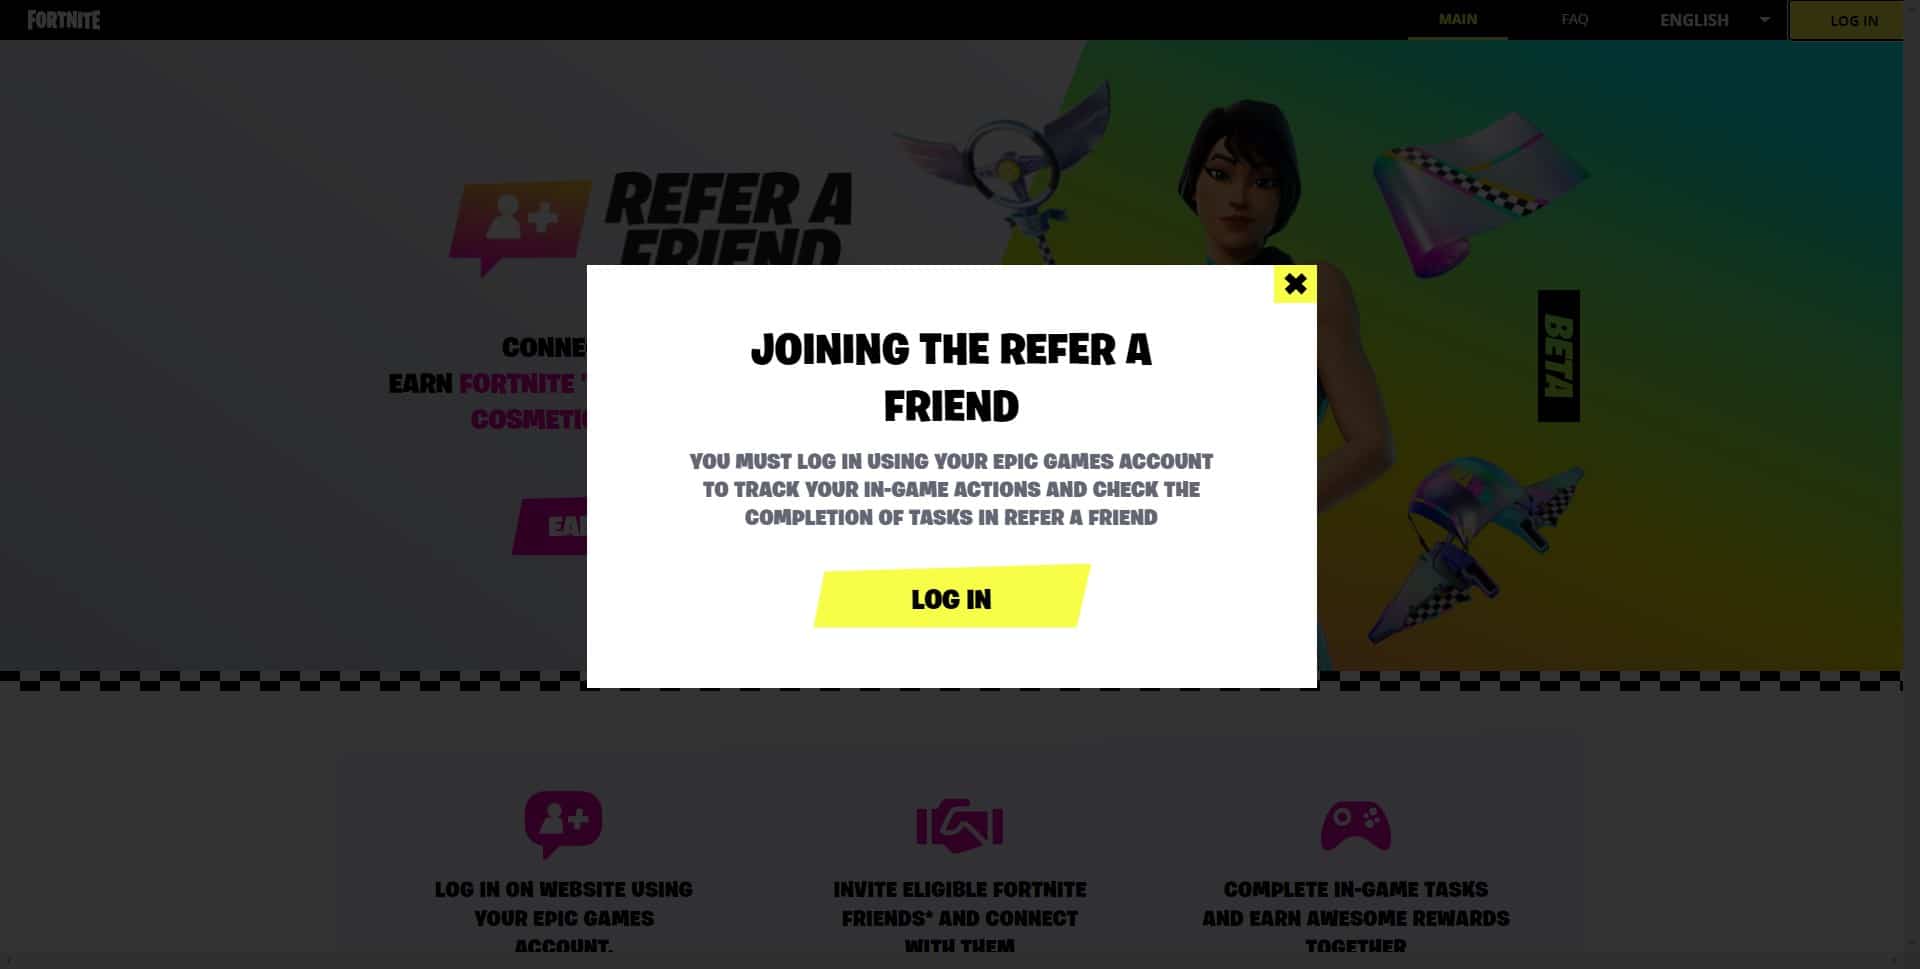 Free outfit, pickaxe, glider and wrap - Refer a Friend Fortnite event